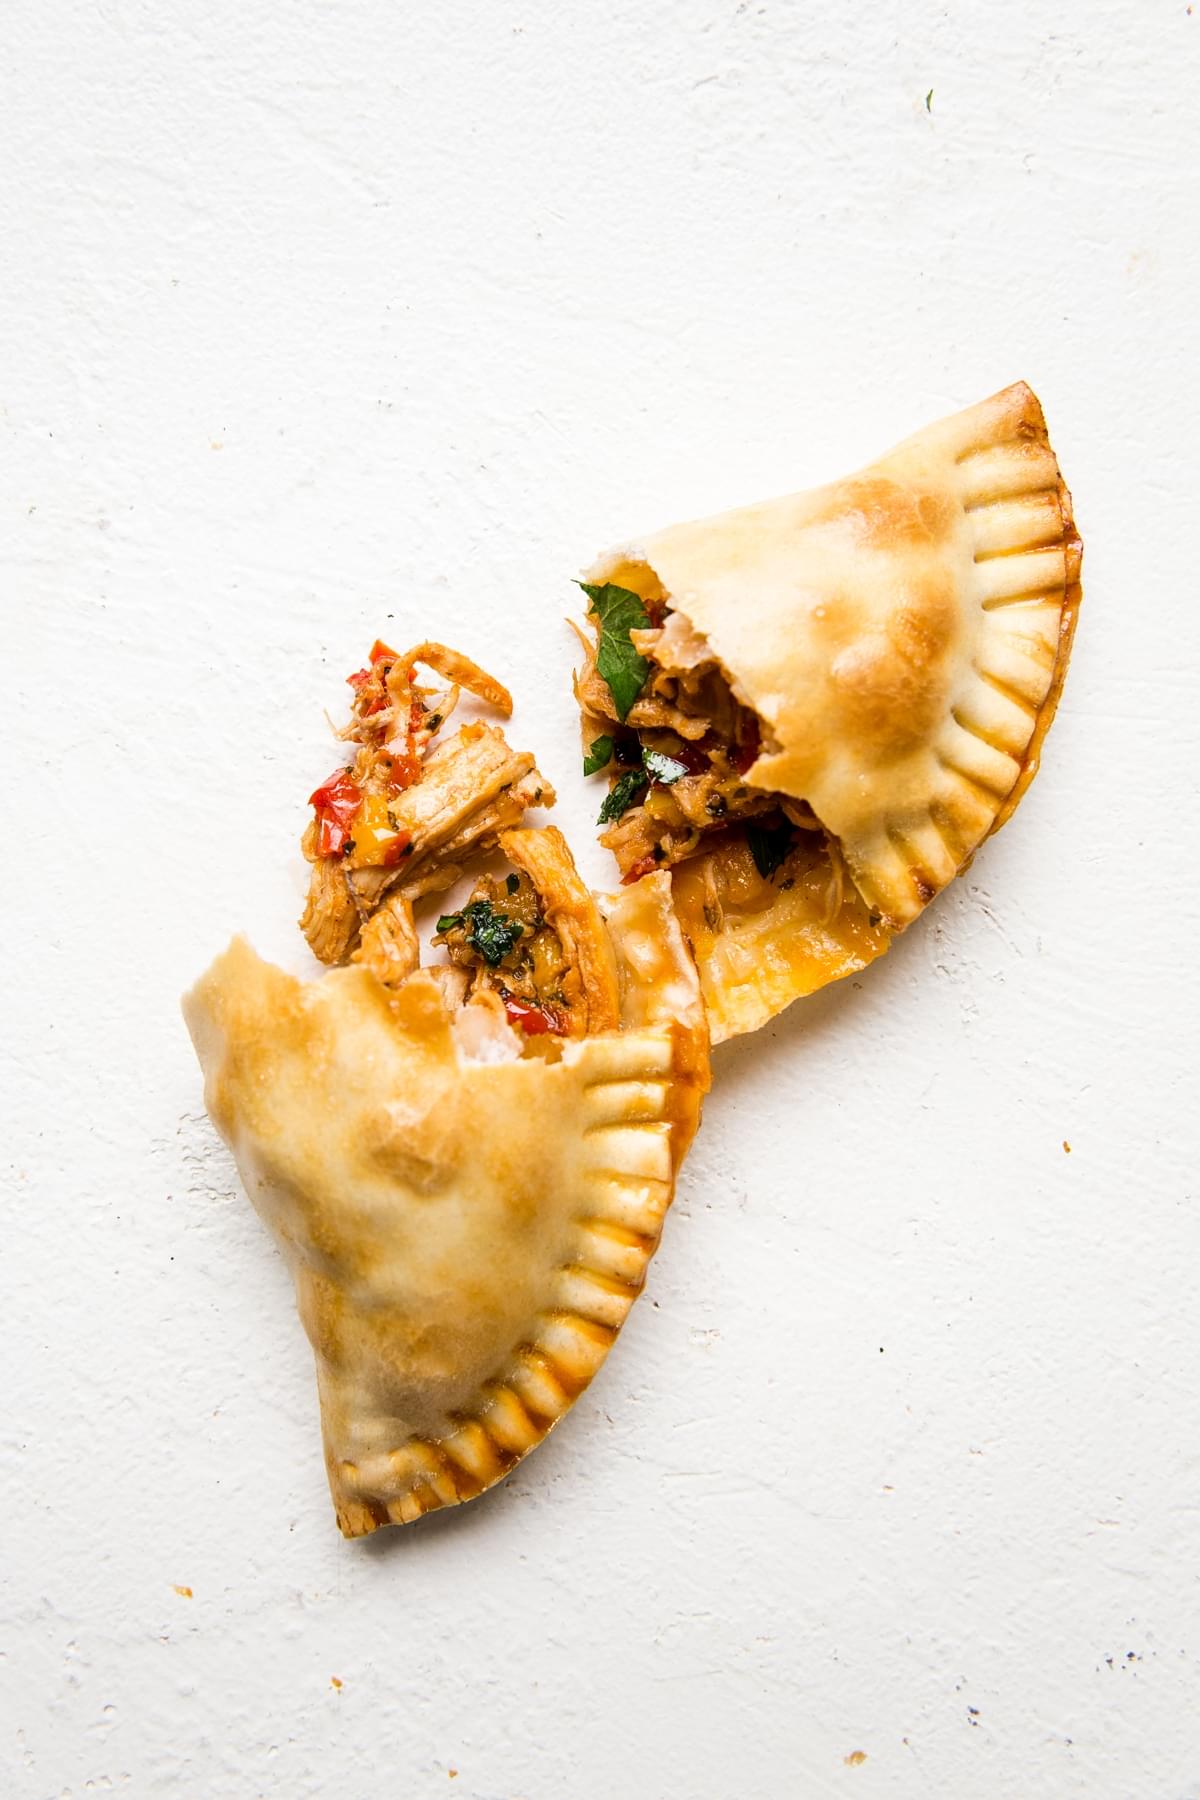 a chicken empanada cut in half to reveal the filling